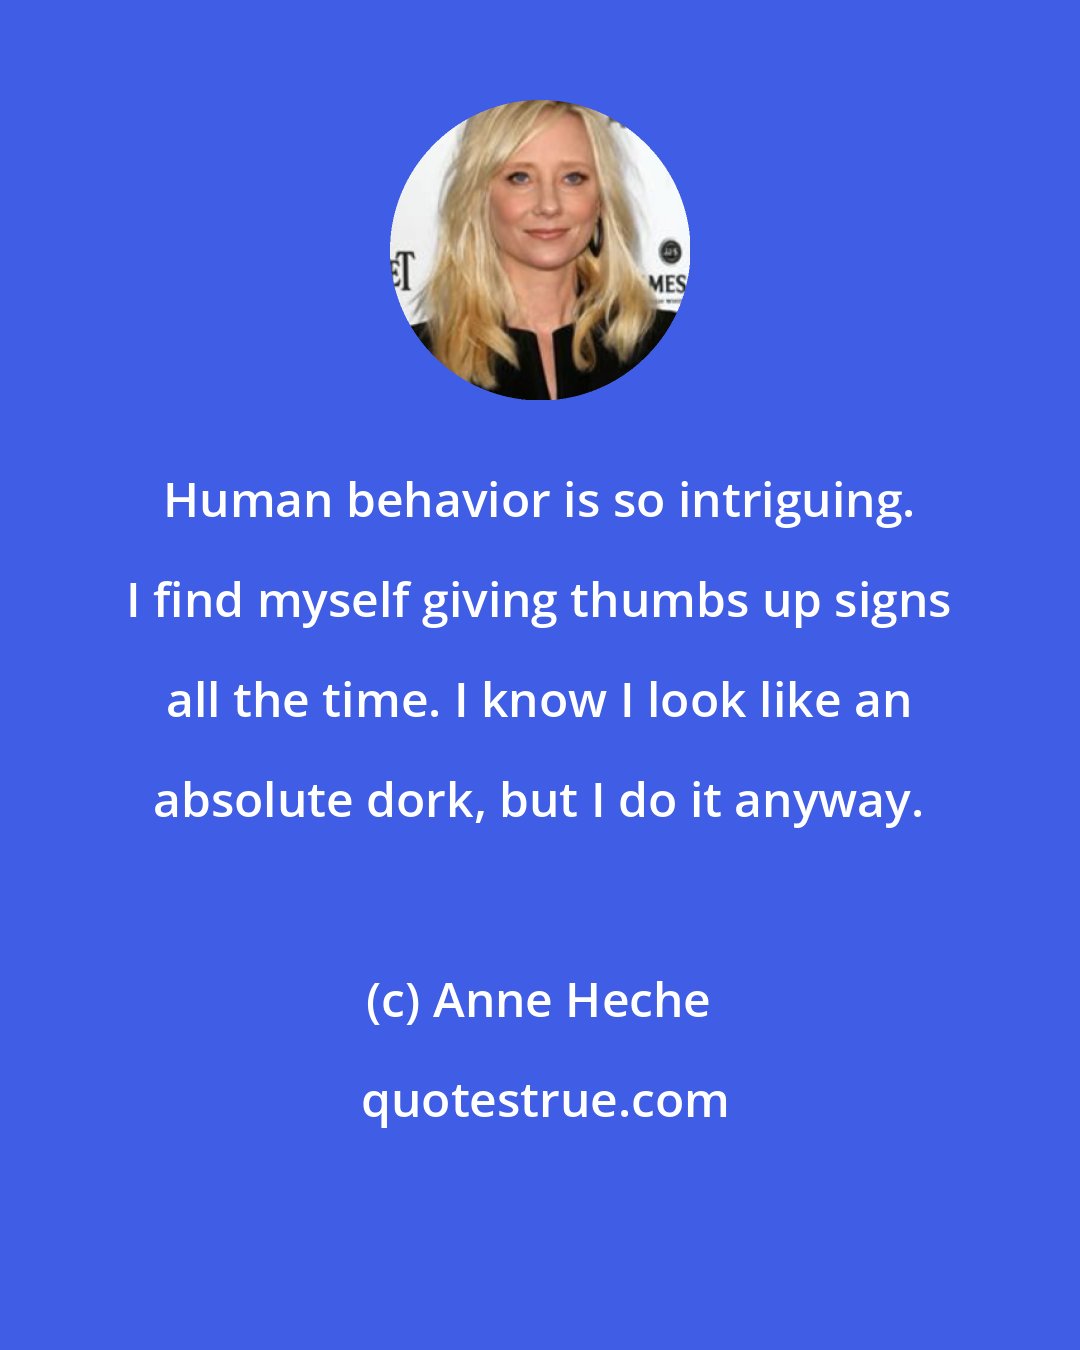 Anne Heche: Human behavior is so intriguing. I find myself giving thumbs up signs all the time. I know I look like an absolute dork, but I do it anyway.